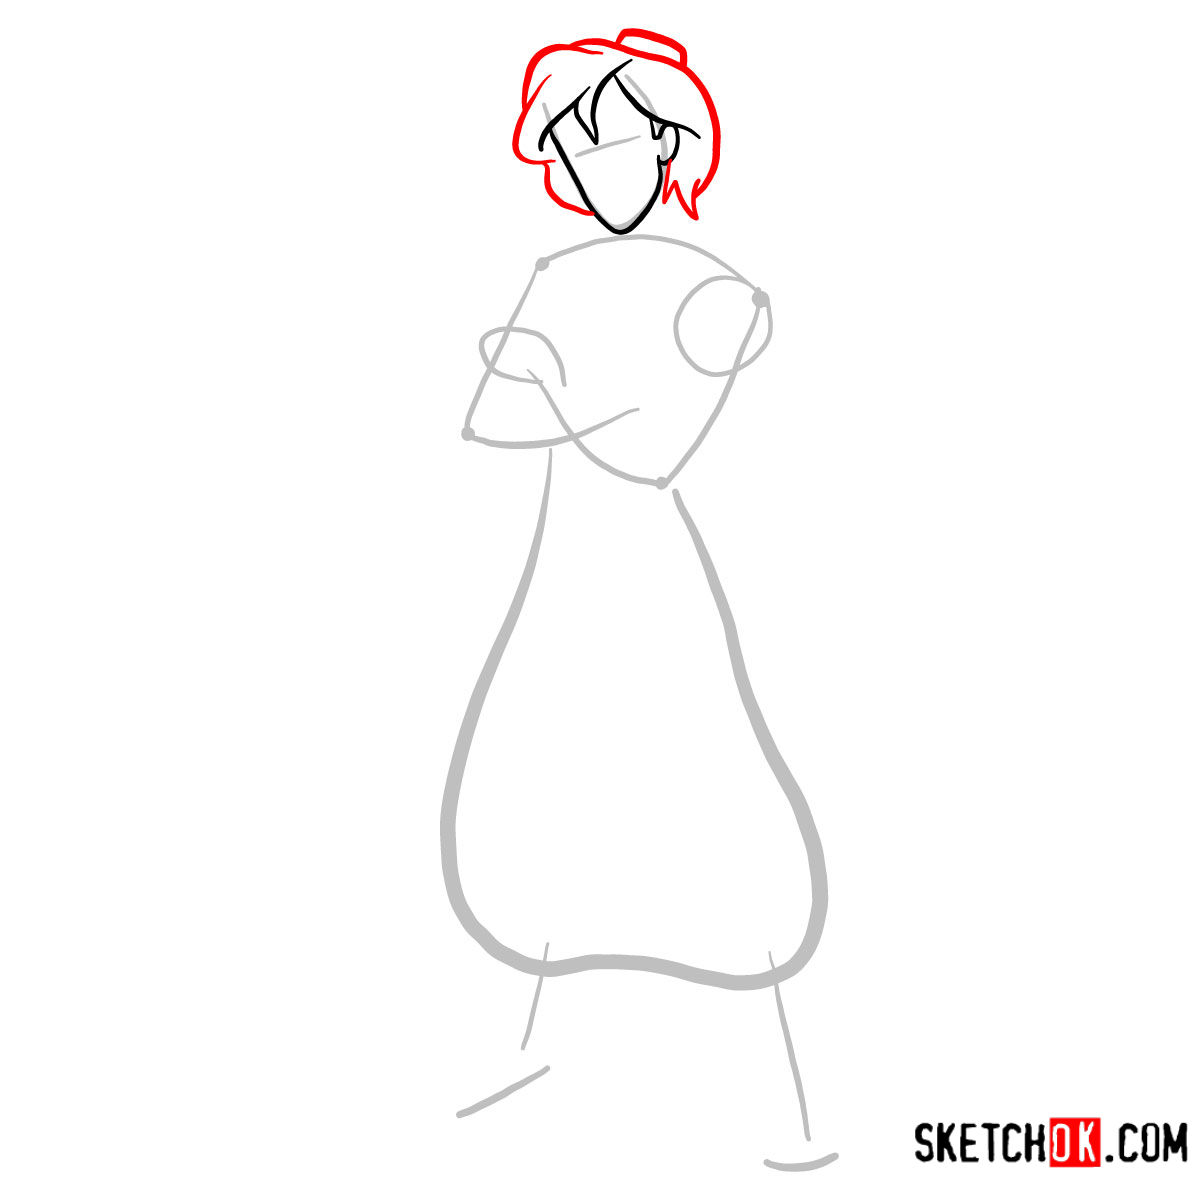 How to draw Aladdin from Disney's animated series - step 03